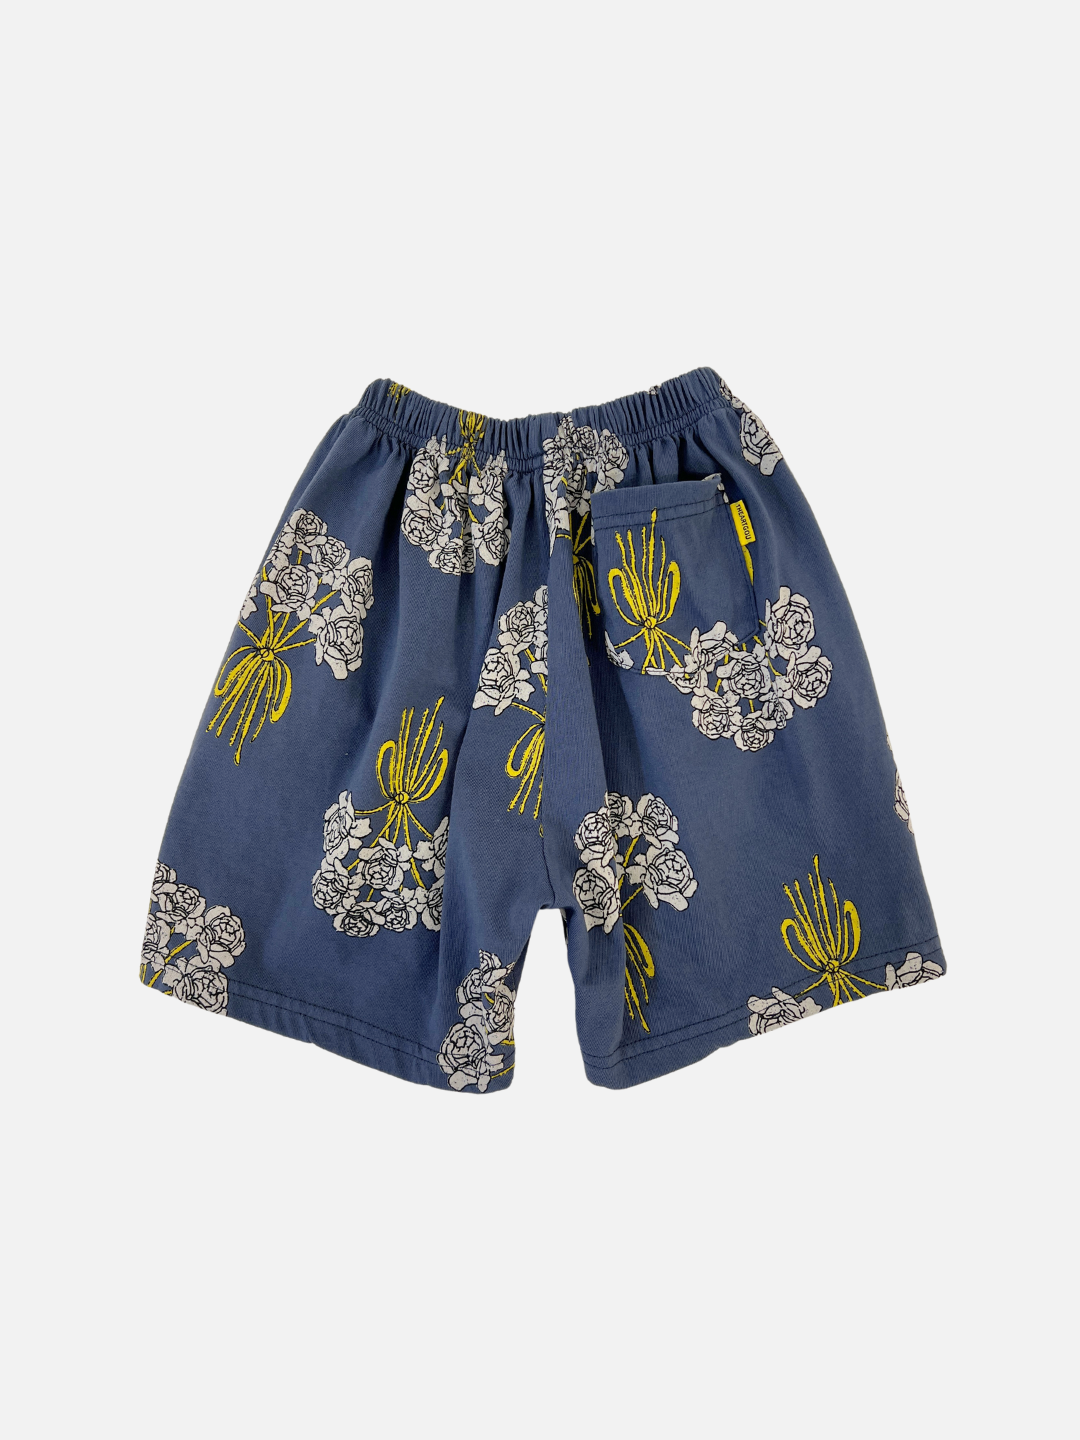 Back view of the kids' Bouquet Shorts. Navy cotton fabric with an all-over white roses bouquet print. Back pocket on the right side.